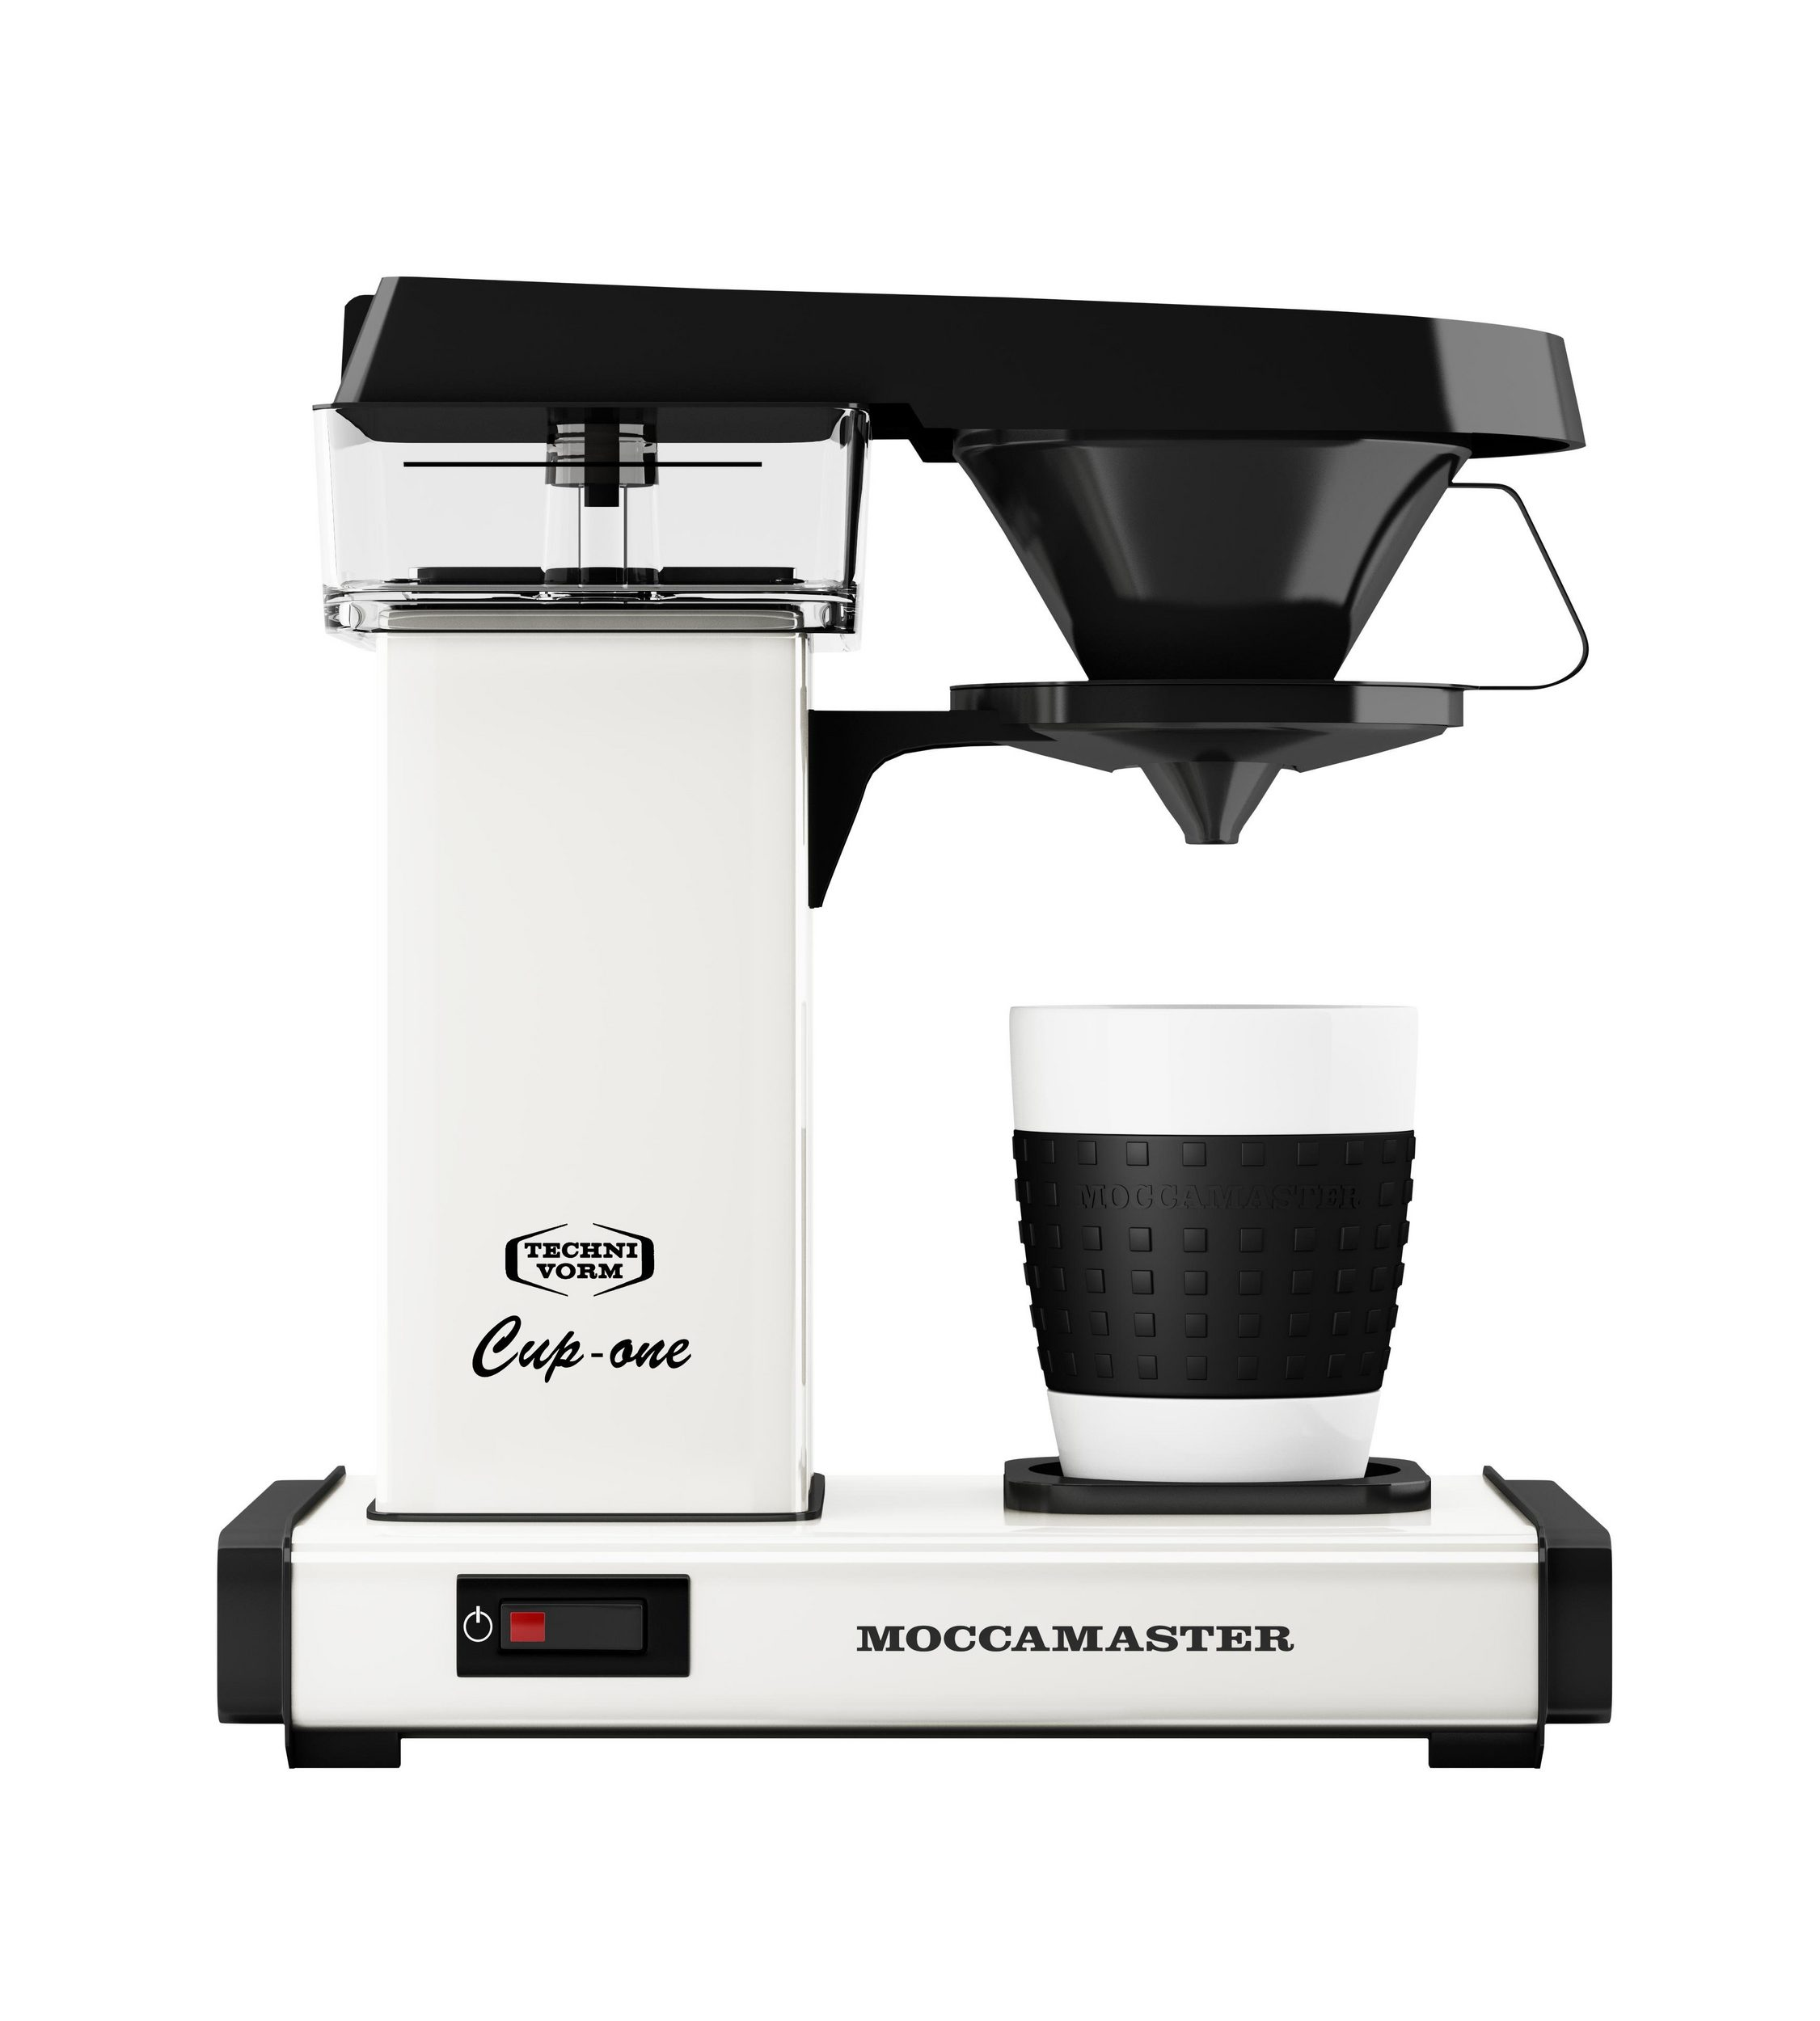 Filterkaffeemaschine Off-White Cup-one MOCCAMASTER